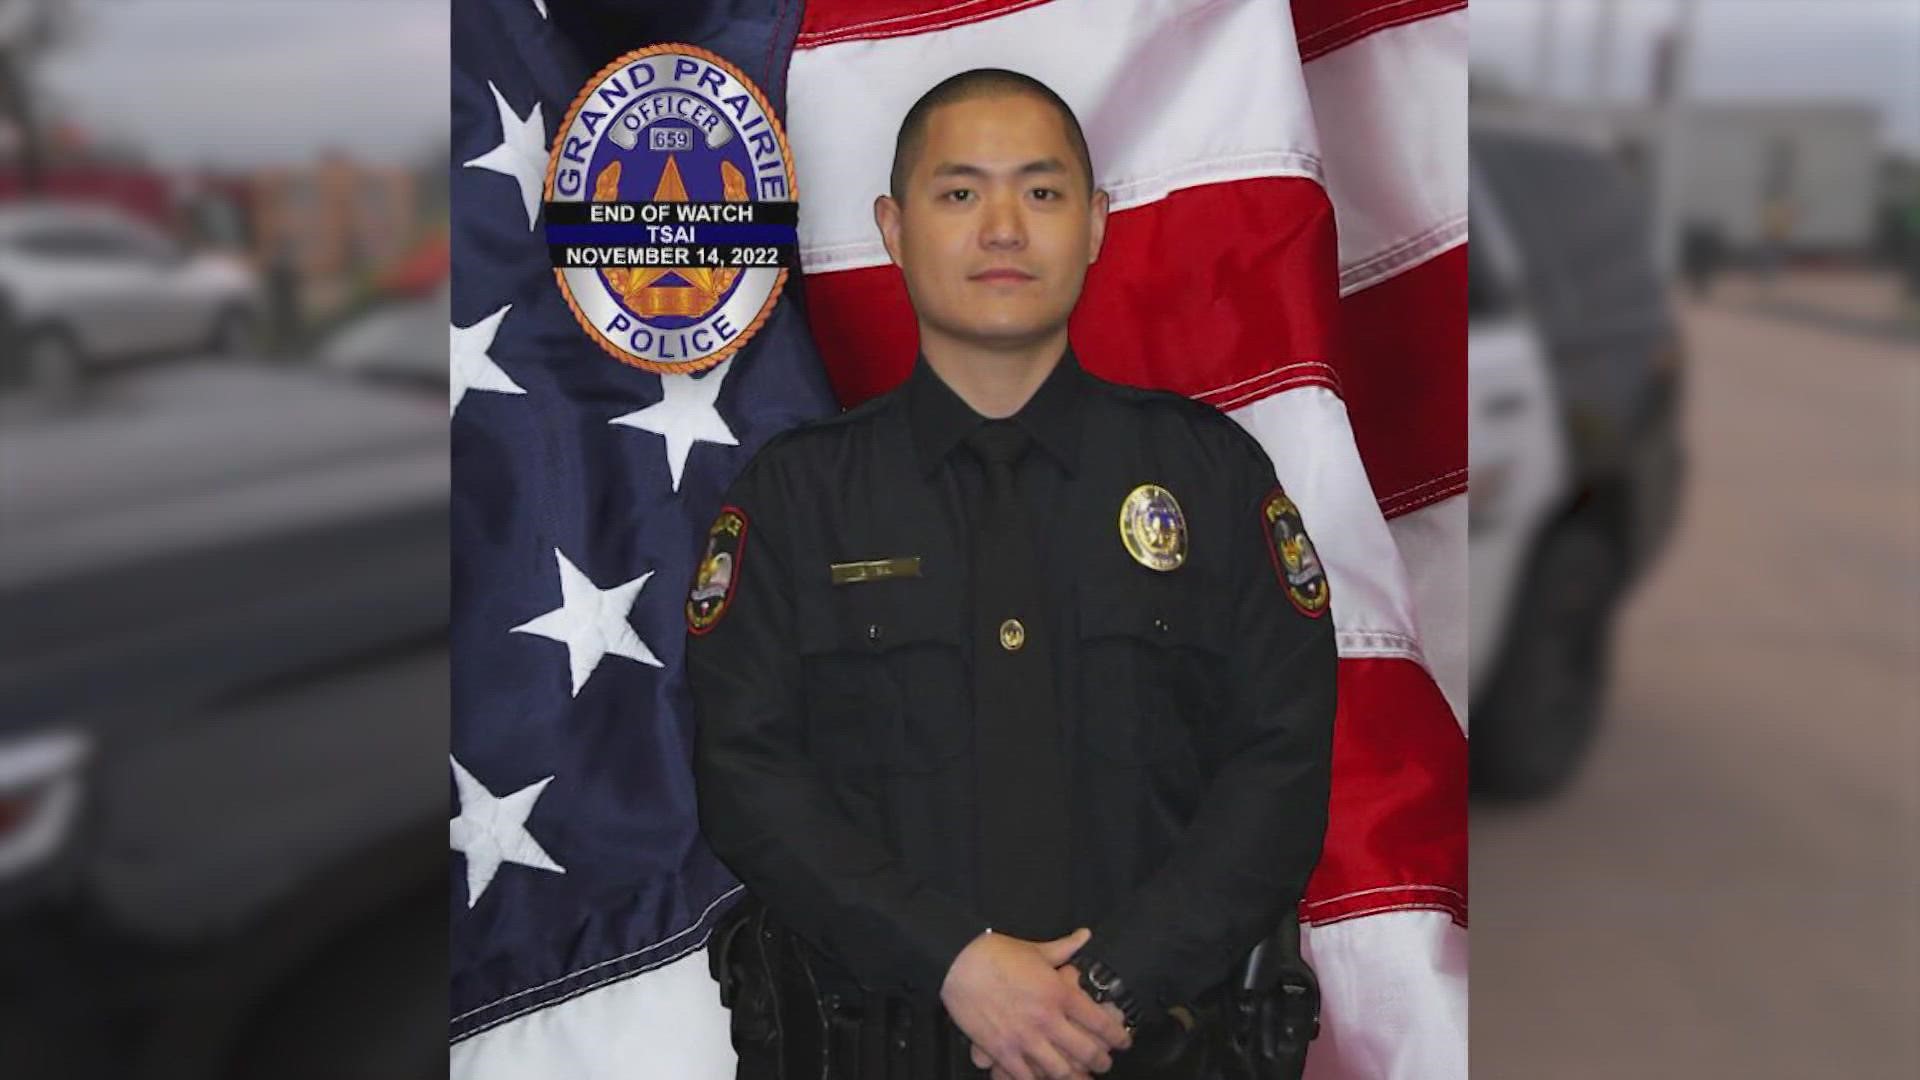 Officer Brandon Paul Tsai was killed after colliding with a light pole while pursuing a vehicle with a fake paper license plate.